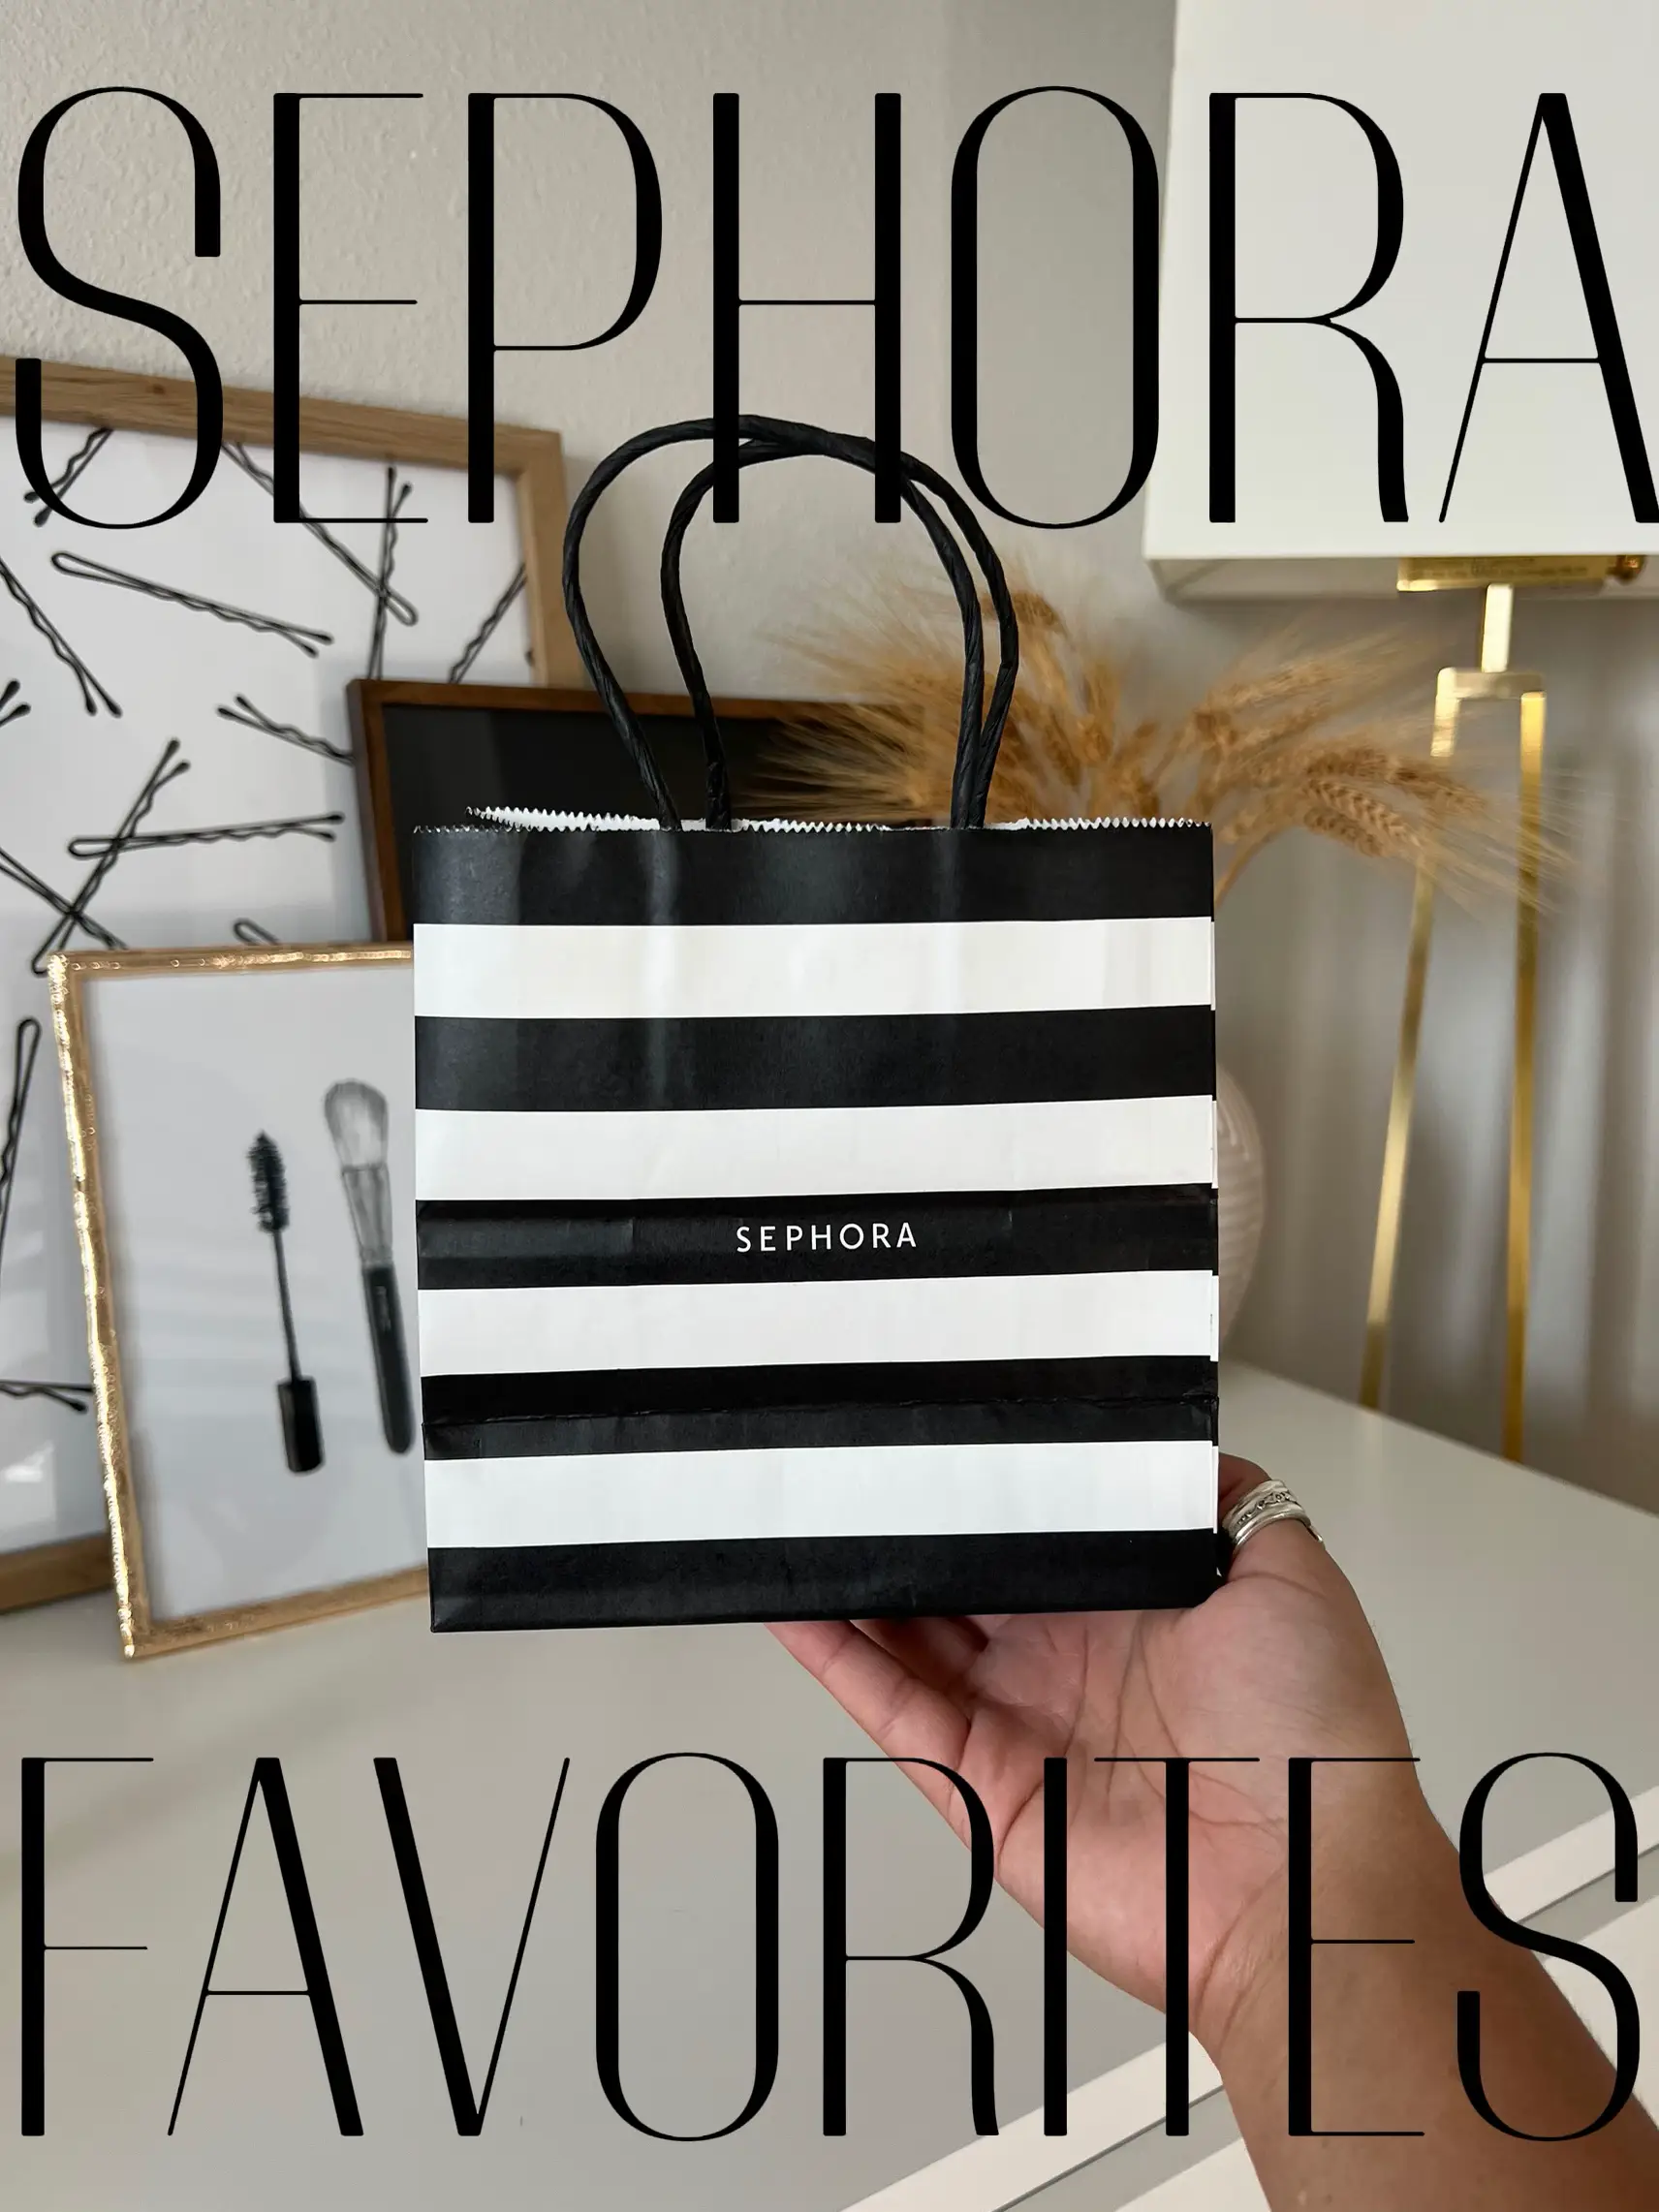 Makeup wonderland: A peek inside the largest Sephora in the world, opening  tomorrow in KL